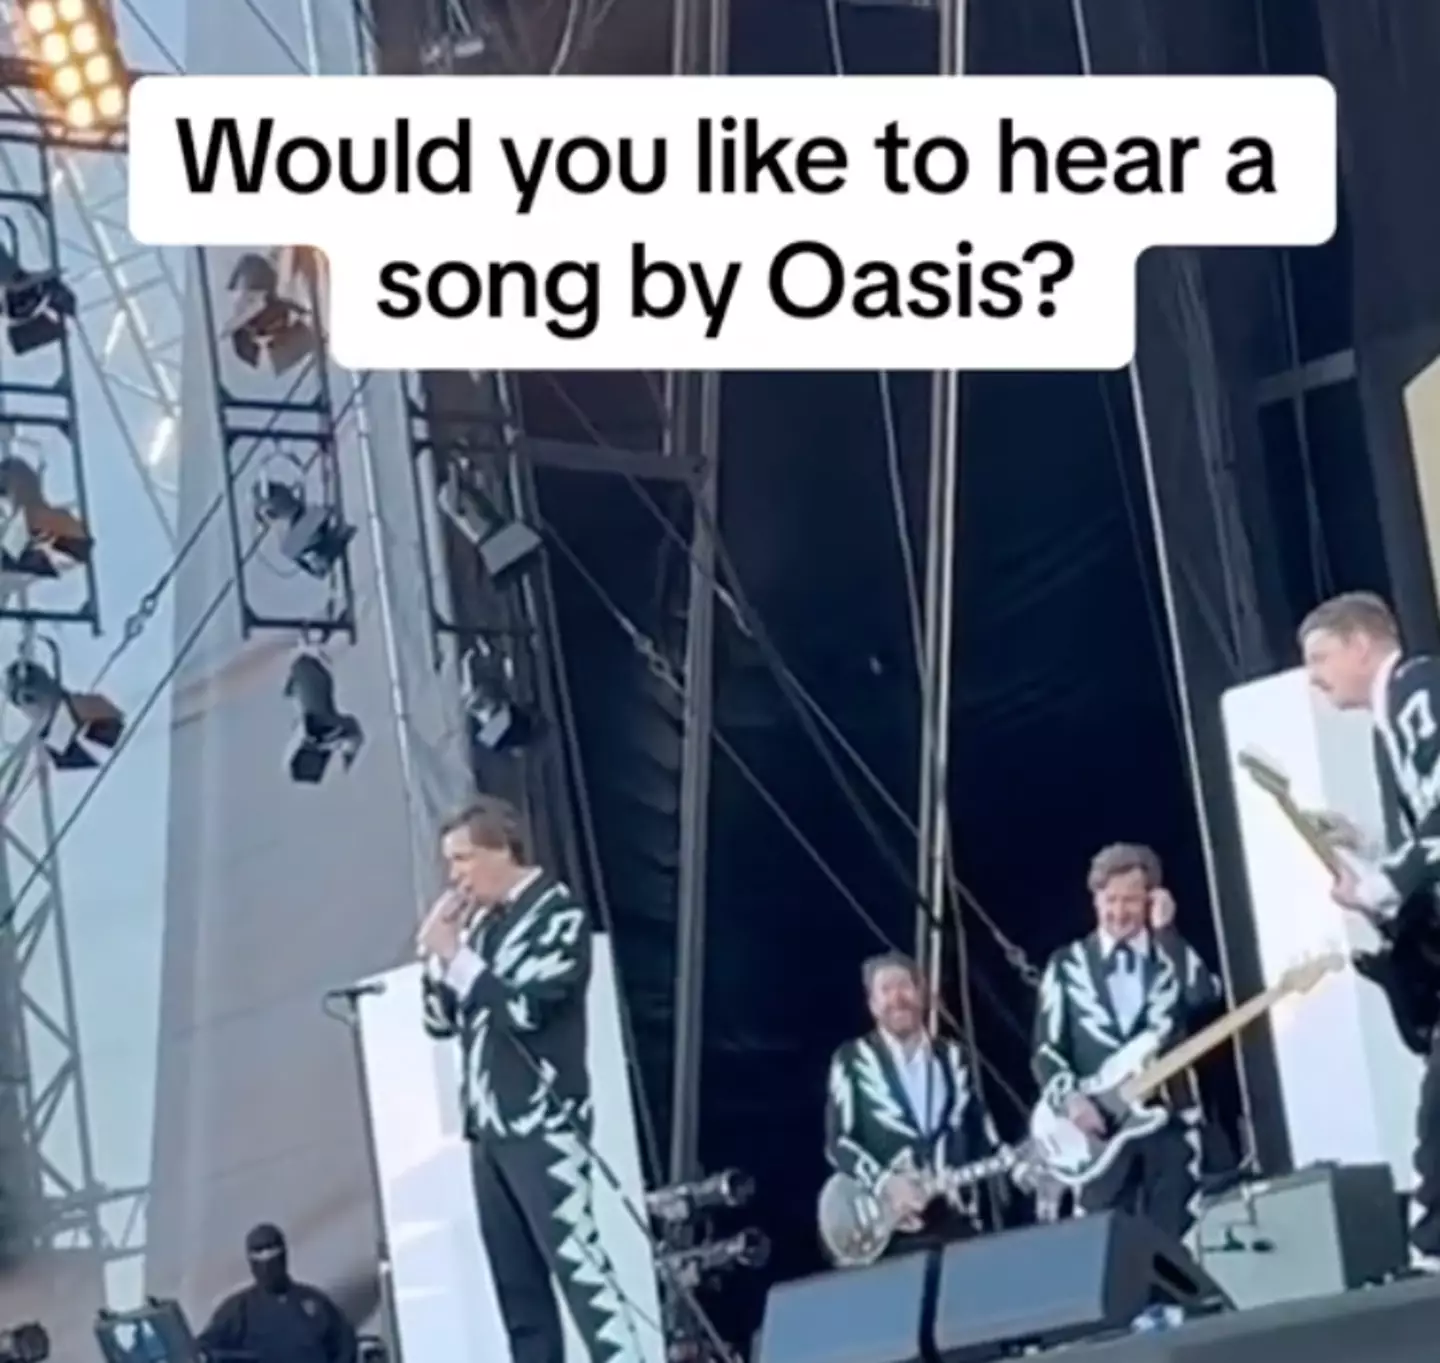 The Hives also asked the audience if they wanted to hear a song by Oasis.